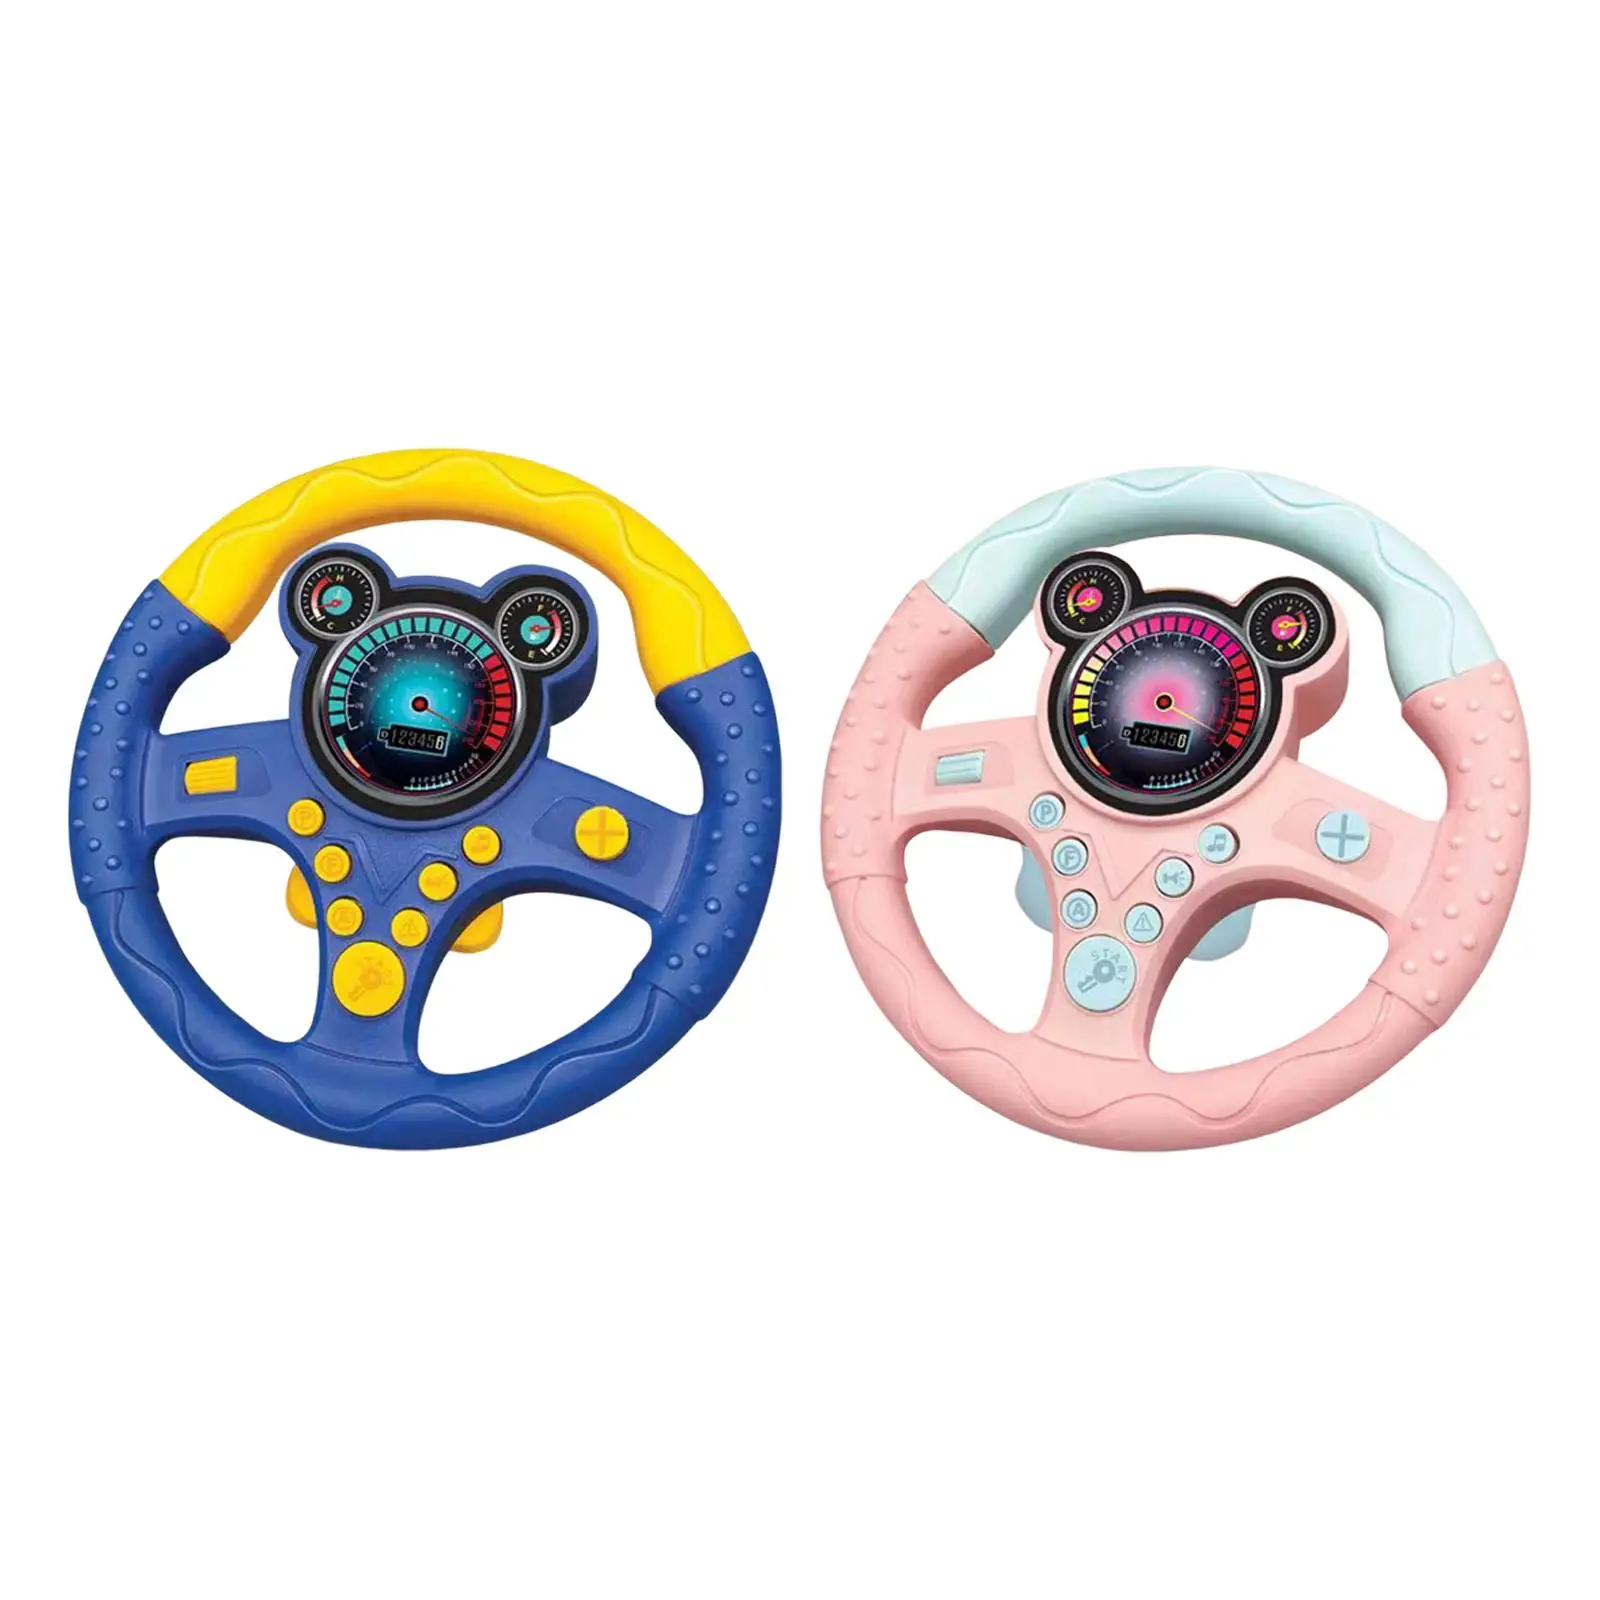 Round Steering Wheel Toy Educational Learning Toy Pretend Driving Toy for Park Backyard Climbing Frame Gifts